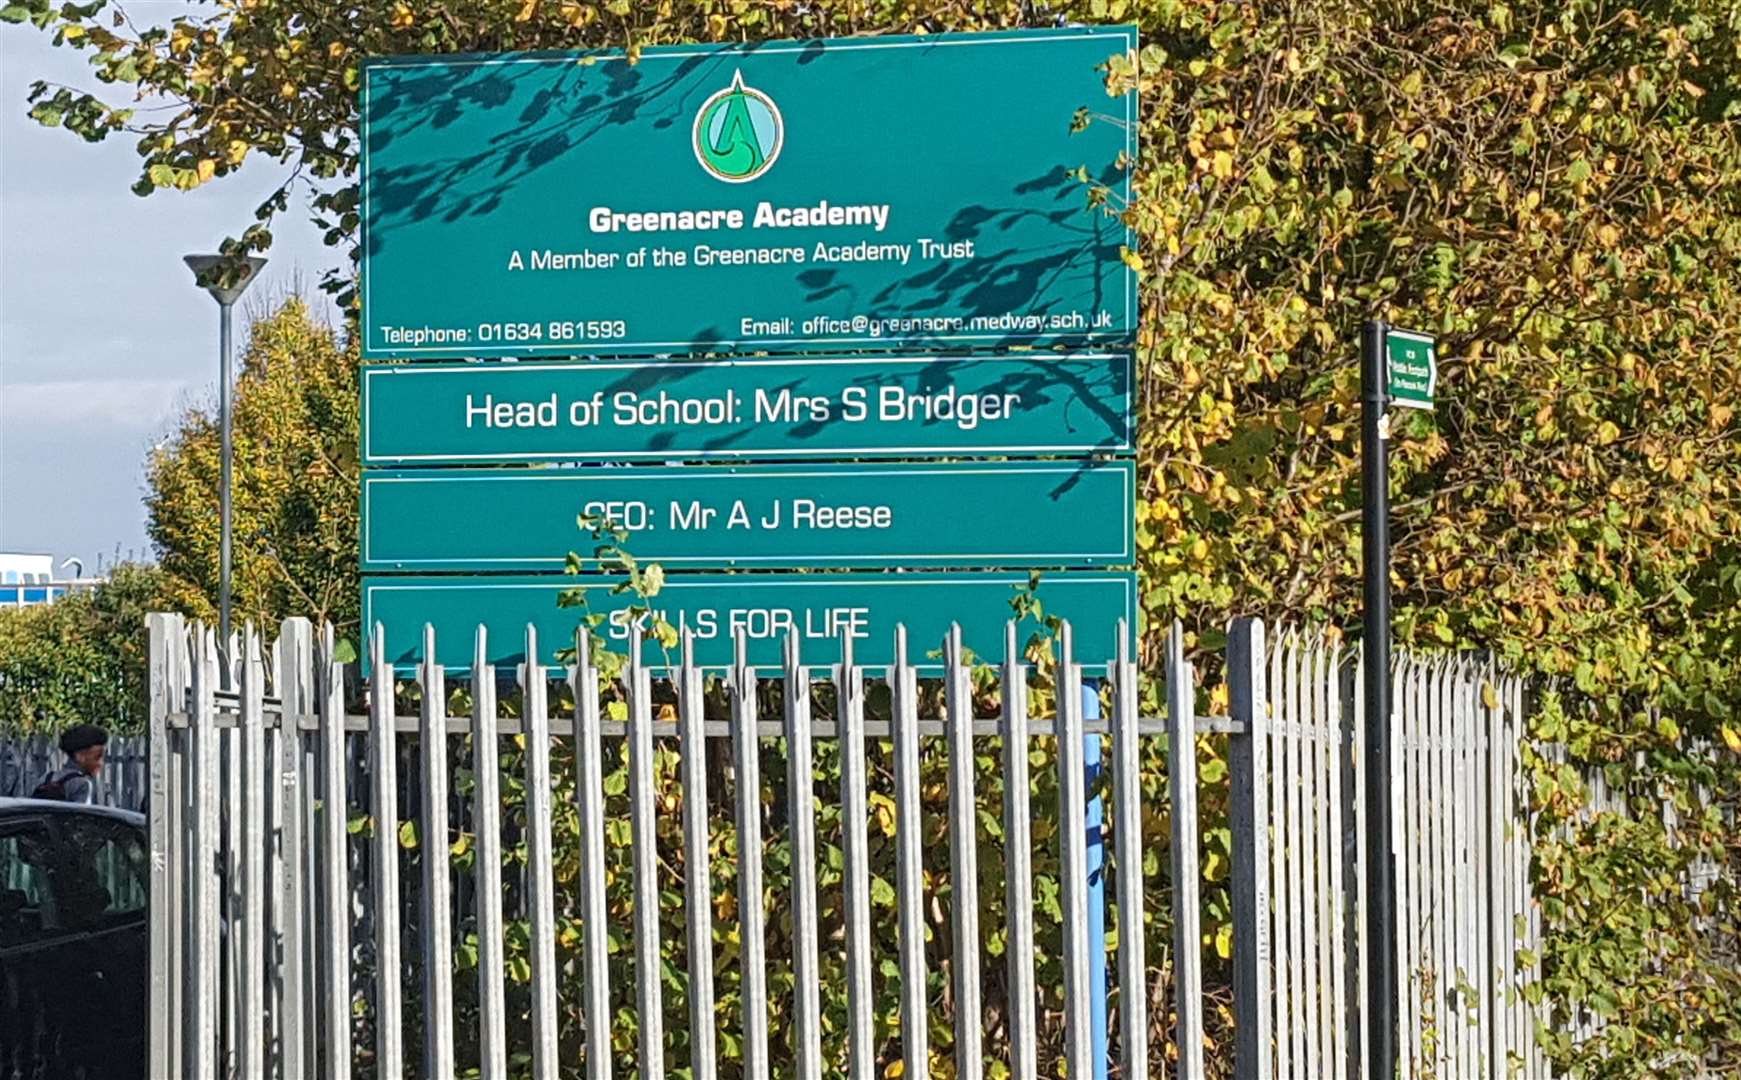 The violent scenes were caught on camera at Greenacre Academy in Walderslade